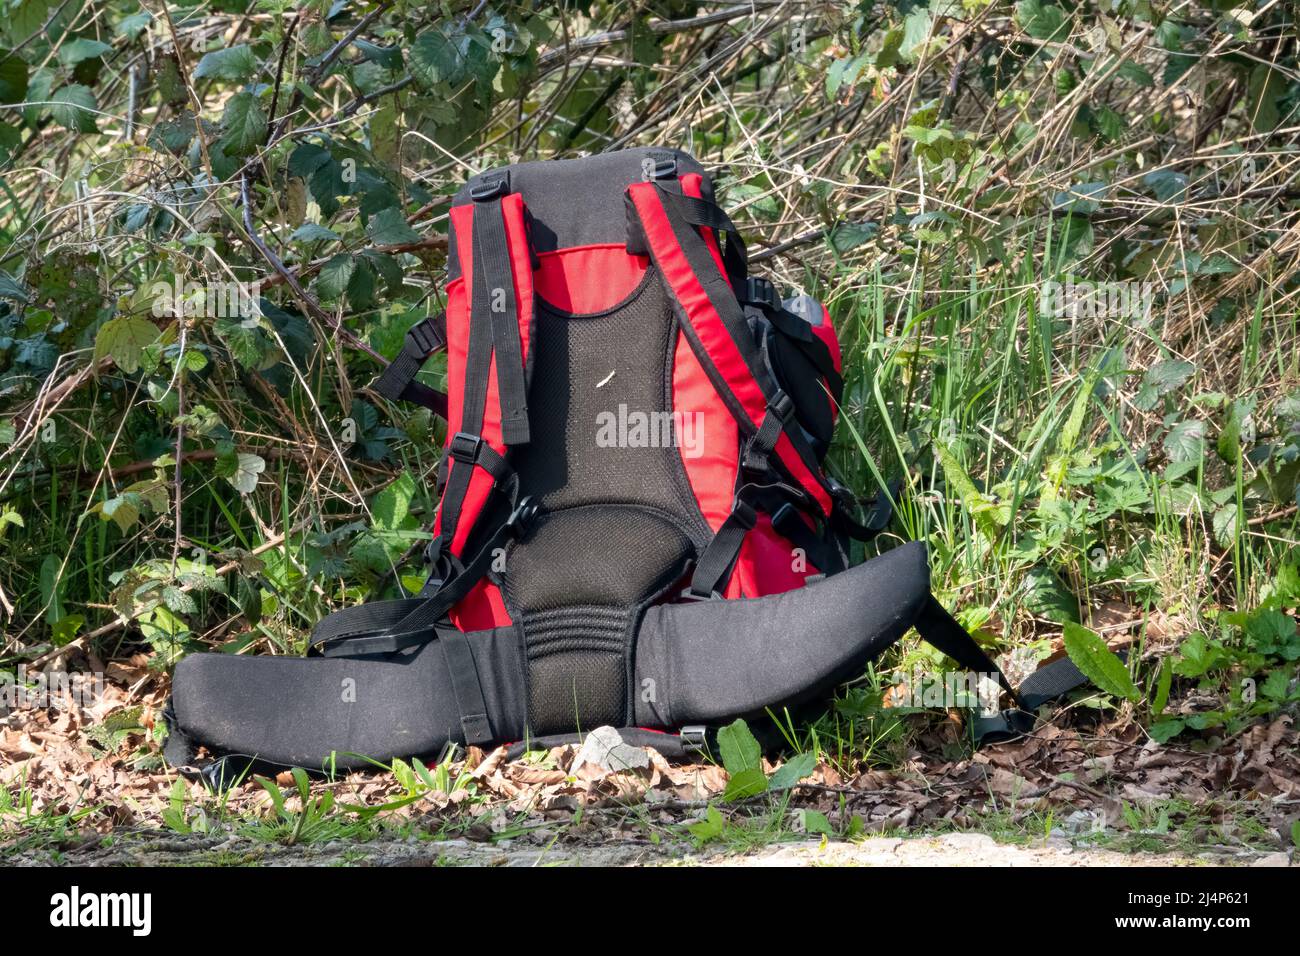 black and red ruck sack abandoned in countryside against grass and undergrowth background Stock Photo